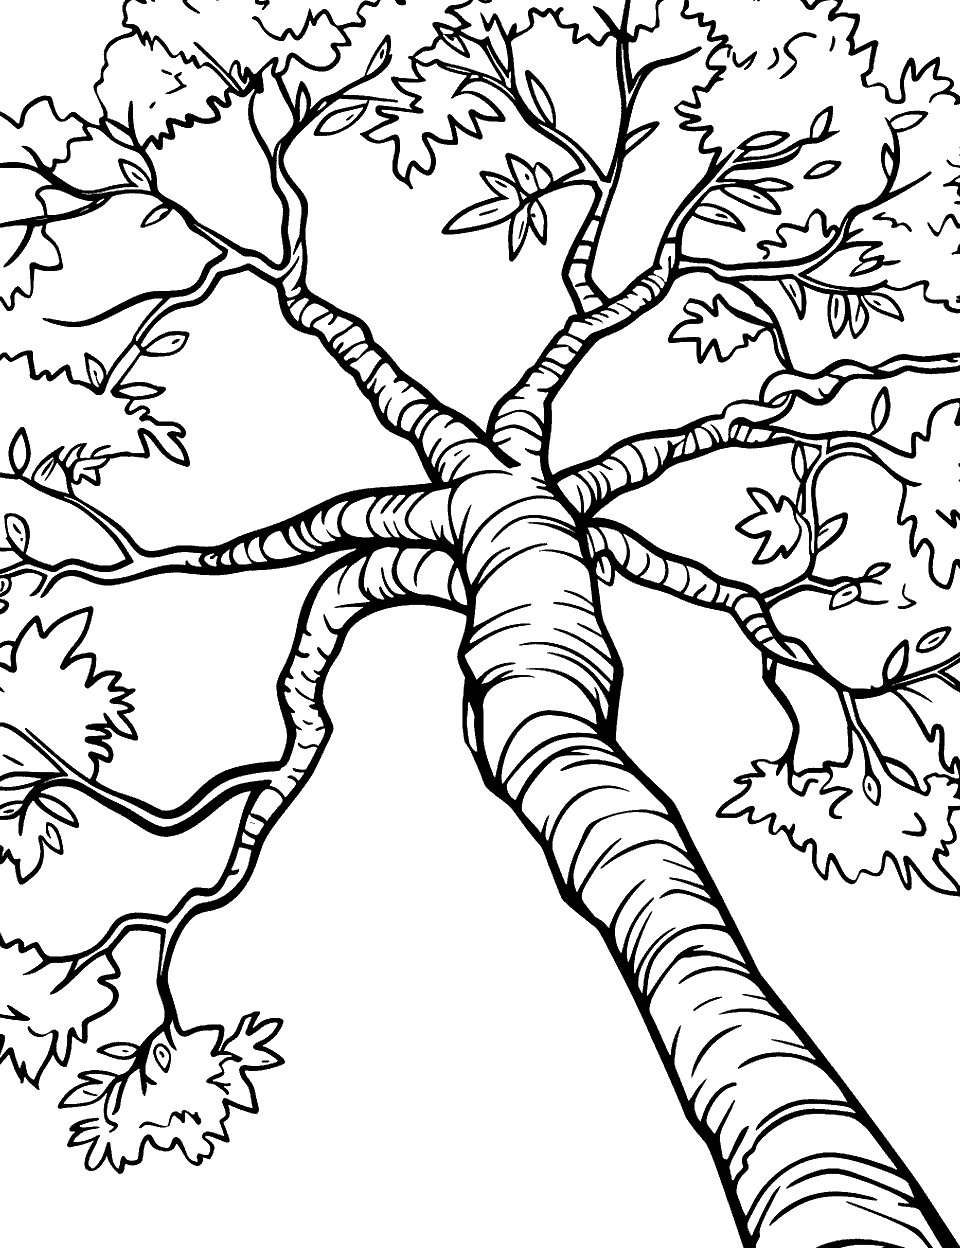 View From the Bottom Coloring Page - The view from the bottom of a a tree, looking at the branches above.